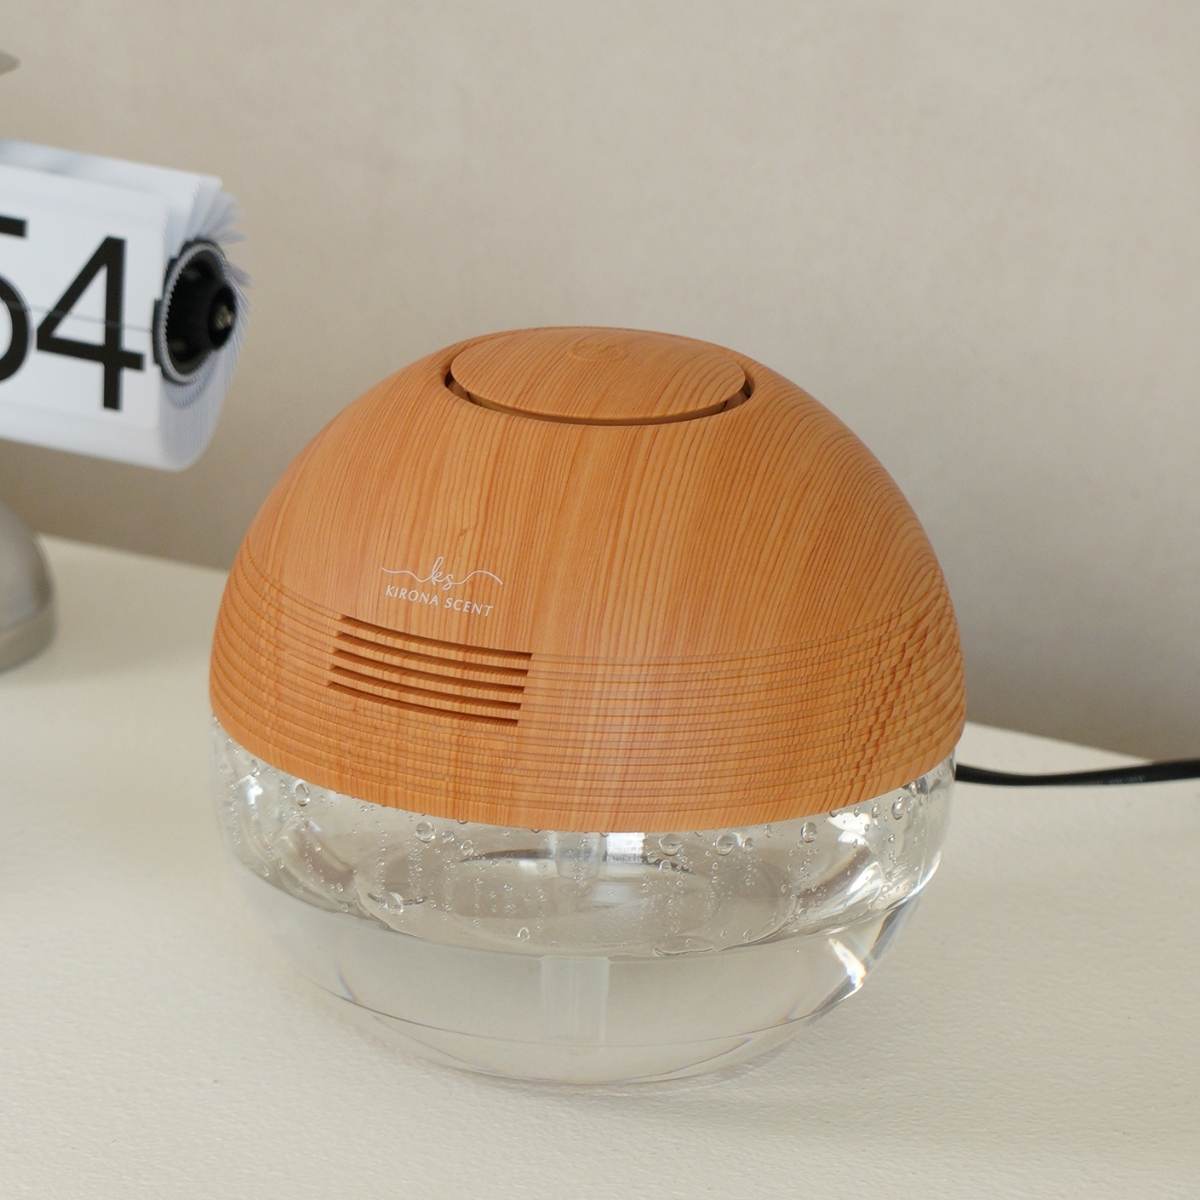 Tranquility Orb Air Purifier (Light Wood)